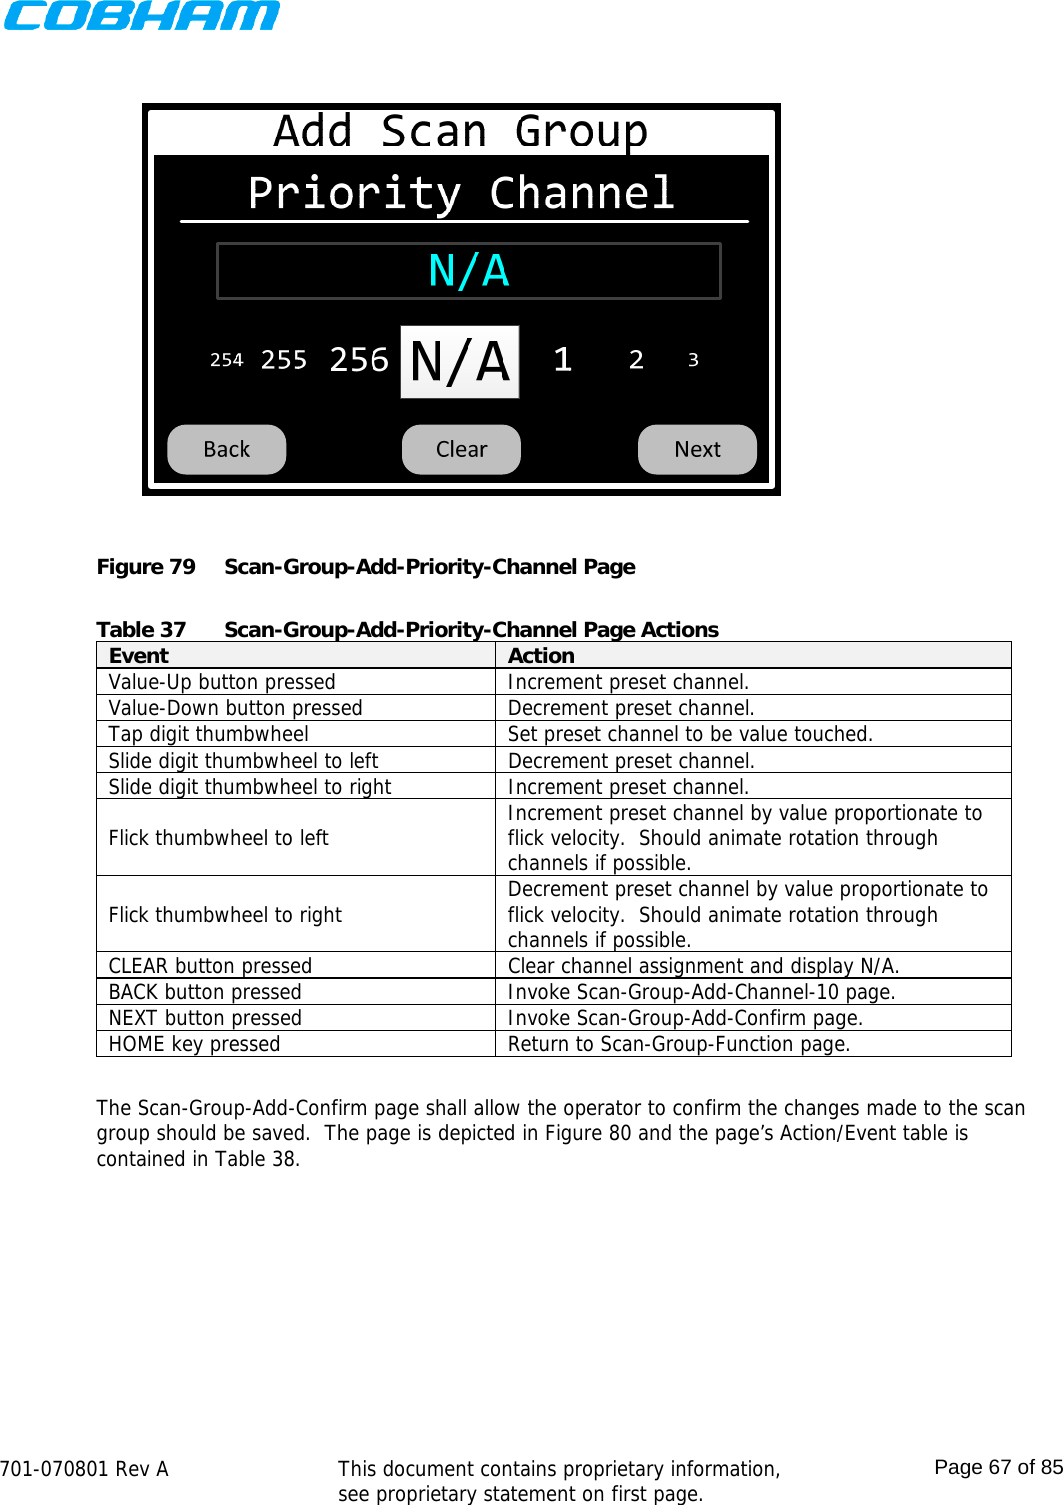    701-070801 Rev A   This document contains proprietary information, see proprietary statement on first page.  Page 67 of 85   Figure 79  Scan-Group-Add-Priority-Channel Page  Table 37  Scan-Group-Add-Priority-Channel Page Actions Event  Action Value-Up button pressed  Increment preset channel. Value-Down button pressed  Decrement preset channel. Tap digit thumbwheel  Set preset channel to be value touched. Slide digit thumbwheel to left  Decrement preset channel. Slide digit thumbwheel to right  Increment preset channel. Flick thumbwheel to left  Increment preset channel by value proportionate to flick velocity.  Should animate rotation through channels if possible. Flick thumbwheel to right  Decrement preset channel by value proportionate to flick velocity.  Should animate rotation through channels if possible. CLEAR button pressed  Clear channel assignment and display N/A. BACK button pressed  Invoke Scan-Group-Add-Channel-10 page. NEXT button pressed  Invoke Scan-Group-Add-Confirm page. HOME key pressed  Return to Scan-Group-Function page.  The Scan-Group-Add-Confirm page shall allow the operator to confirm the changes made to the scan group should be saved.  The page is depicted in Figure 80 and the page’s Action/Event table is contained in Table 38. 